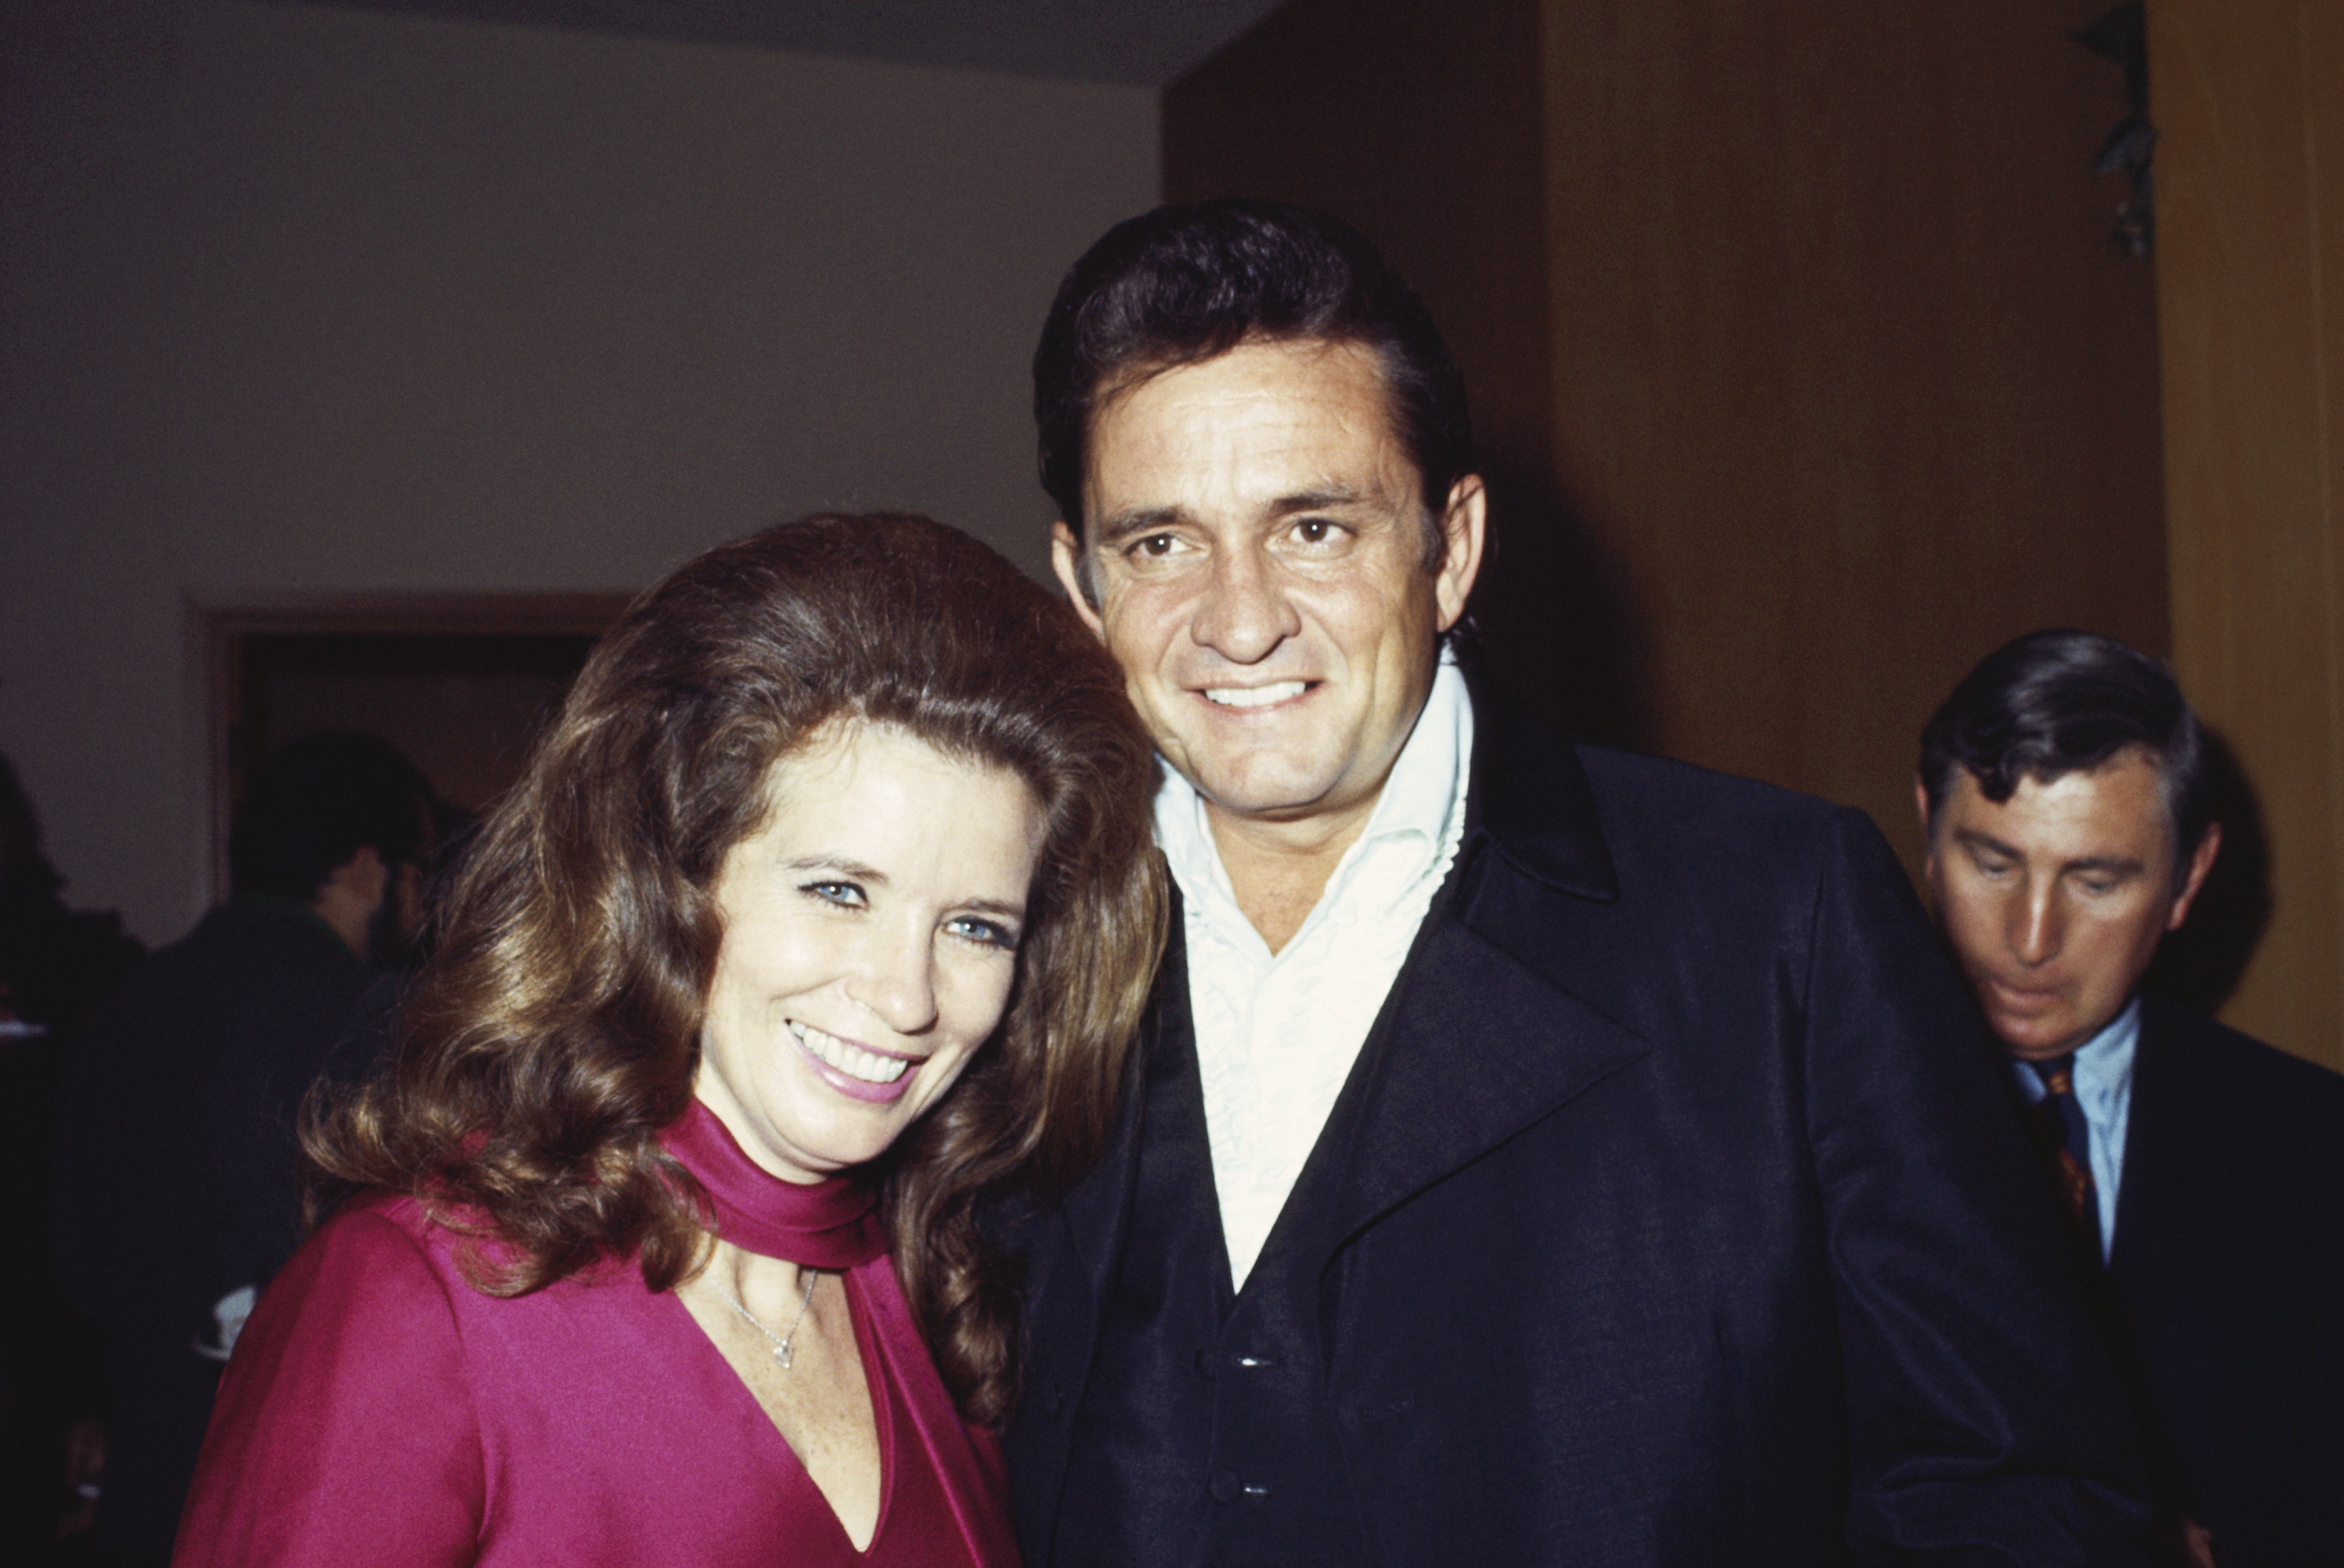 Married country singers Johnny Cash & June Carter Cash pose for a portrait at an event in September 1969 in California. | Photo: Getty Images